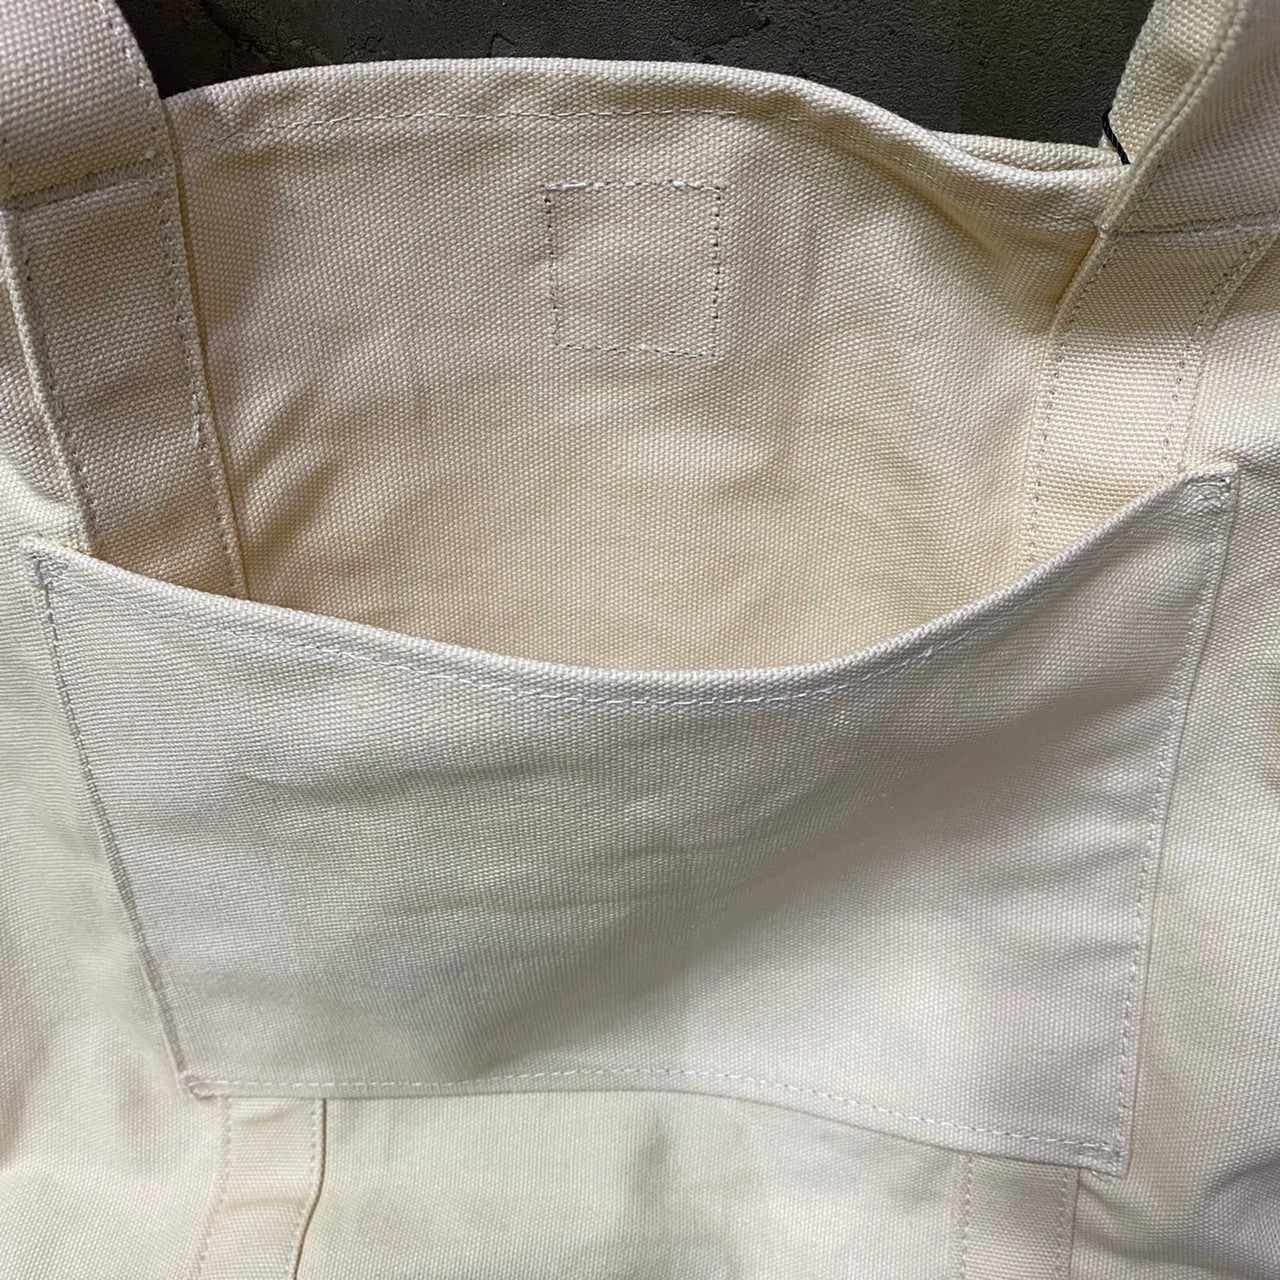 CANVAS UTILITY TOTE BAG / PACKING